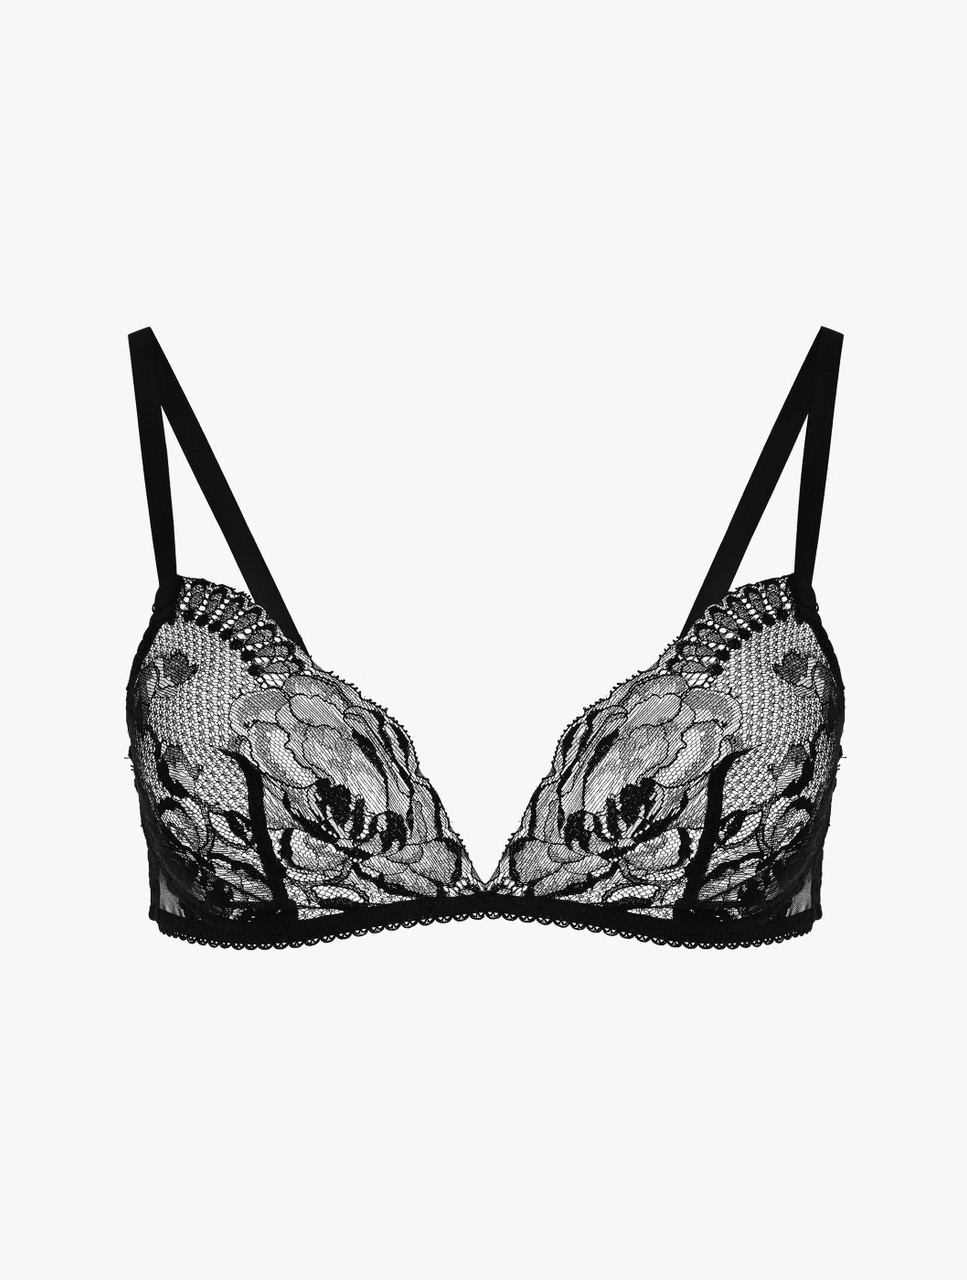 Luxury Lace Non-Wired Bra in Black